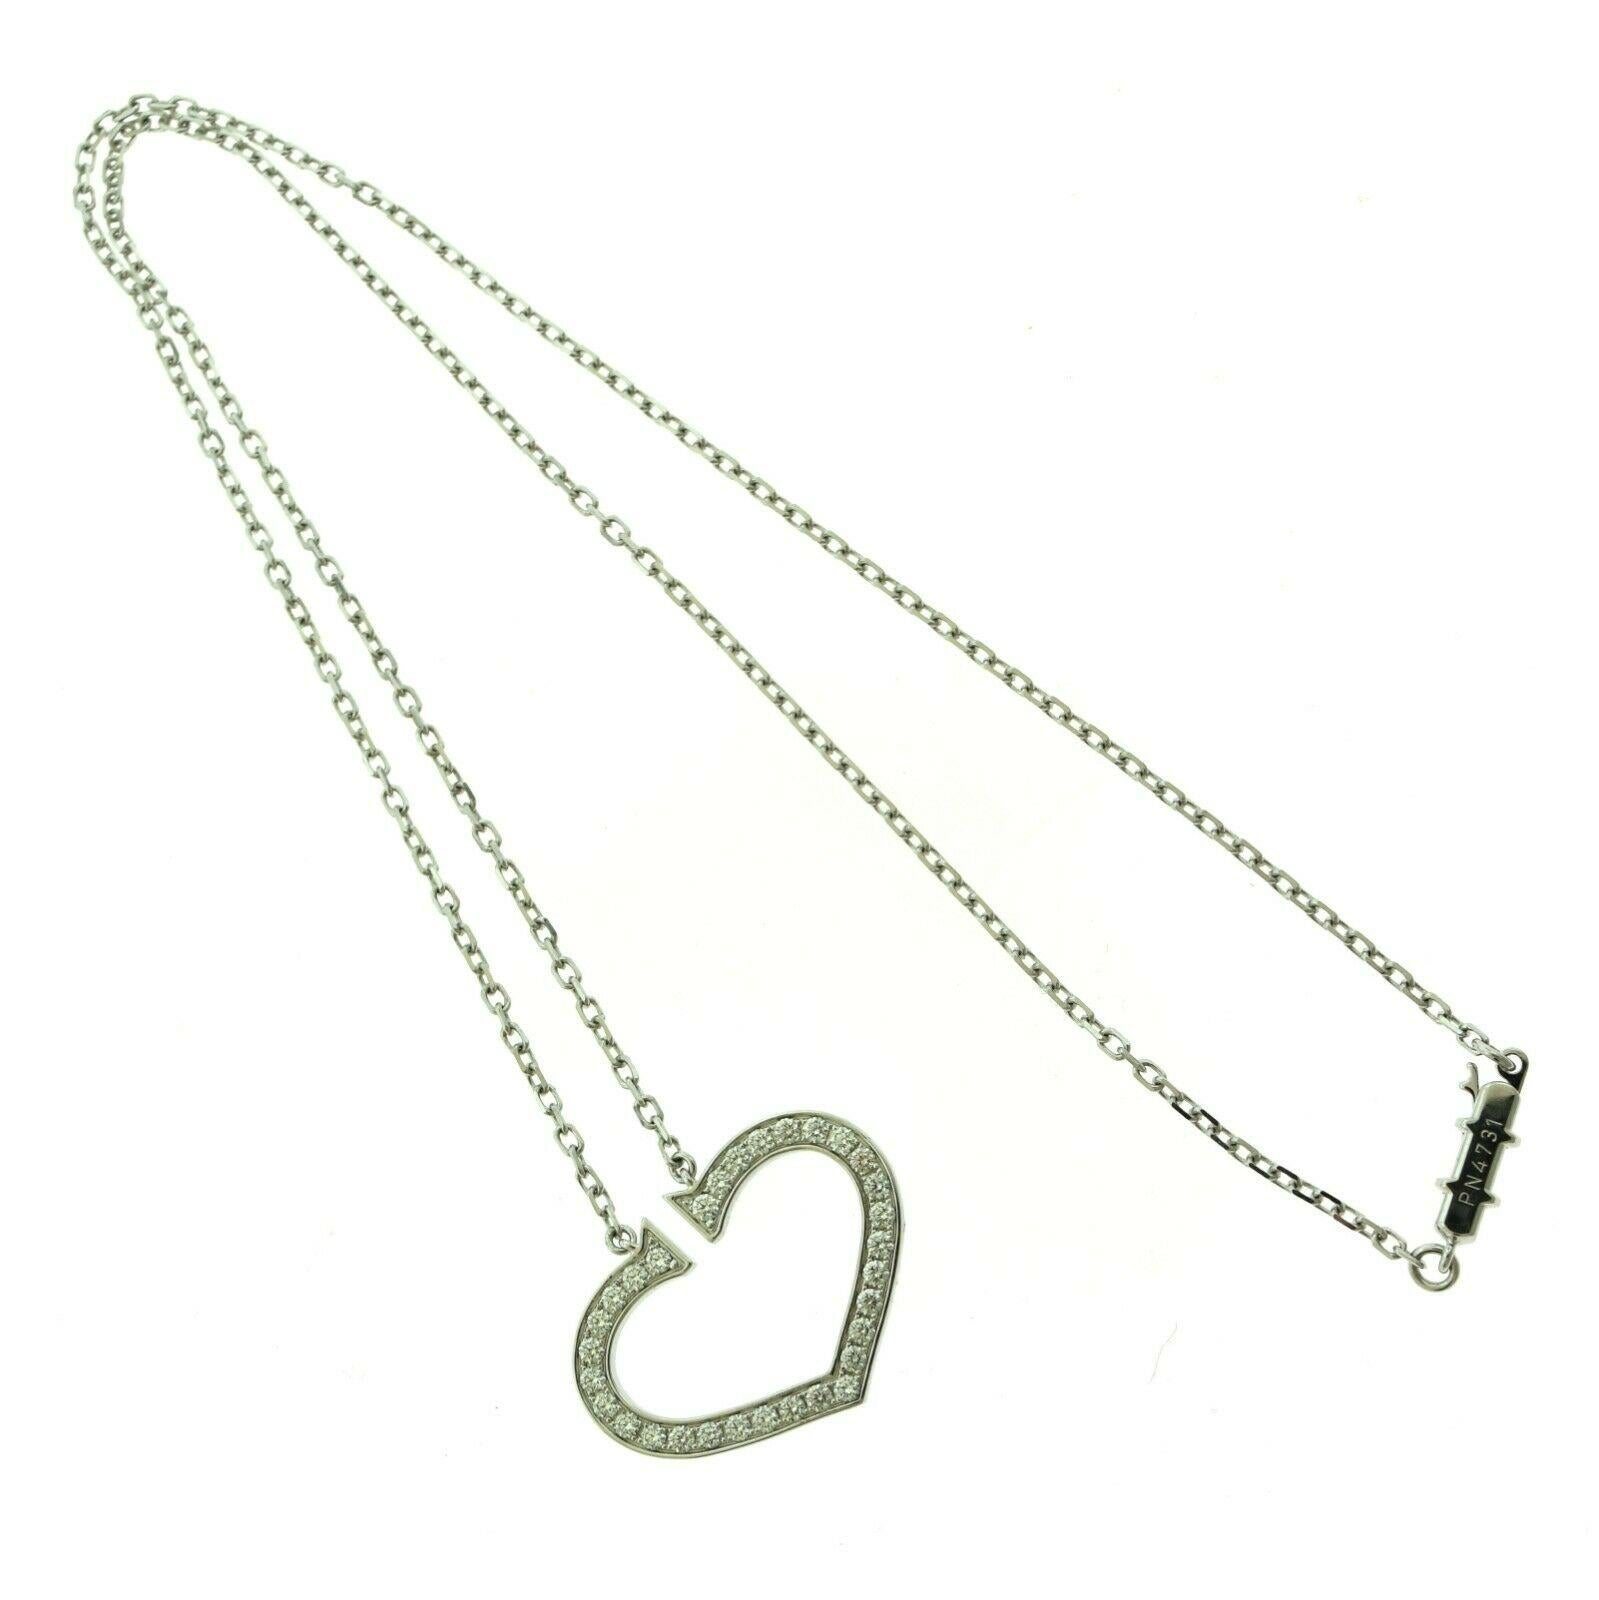 Designer: Cartier

Collection: Hearts and Symbols

Style: Pendant Necklace

Metal: White Gold

Metal Purity: 18k

Stones: Round Brilliant Cut Diamonds

Total Item Weight (grams): 18k

Necklace Length: approx. 17 inches

​​​​​​​Heart (Pendant)